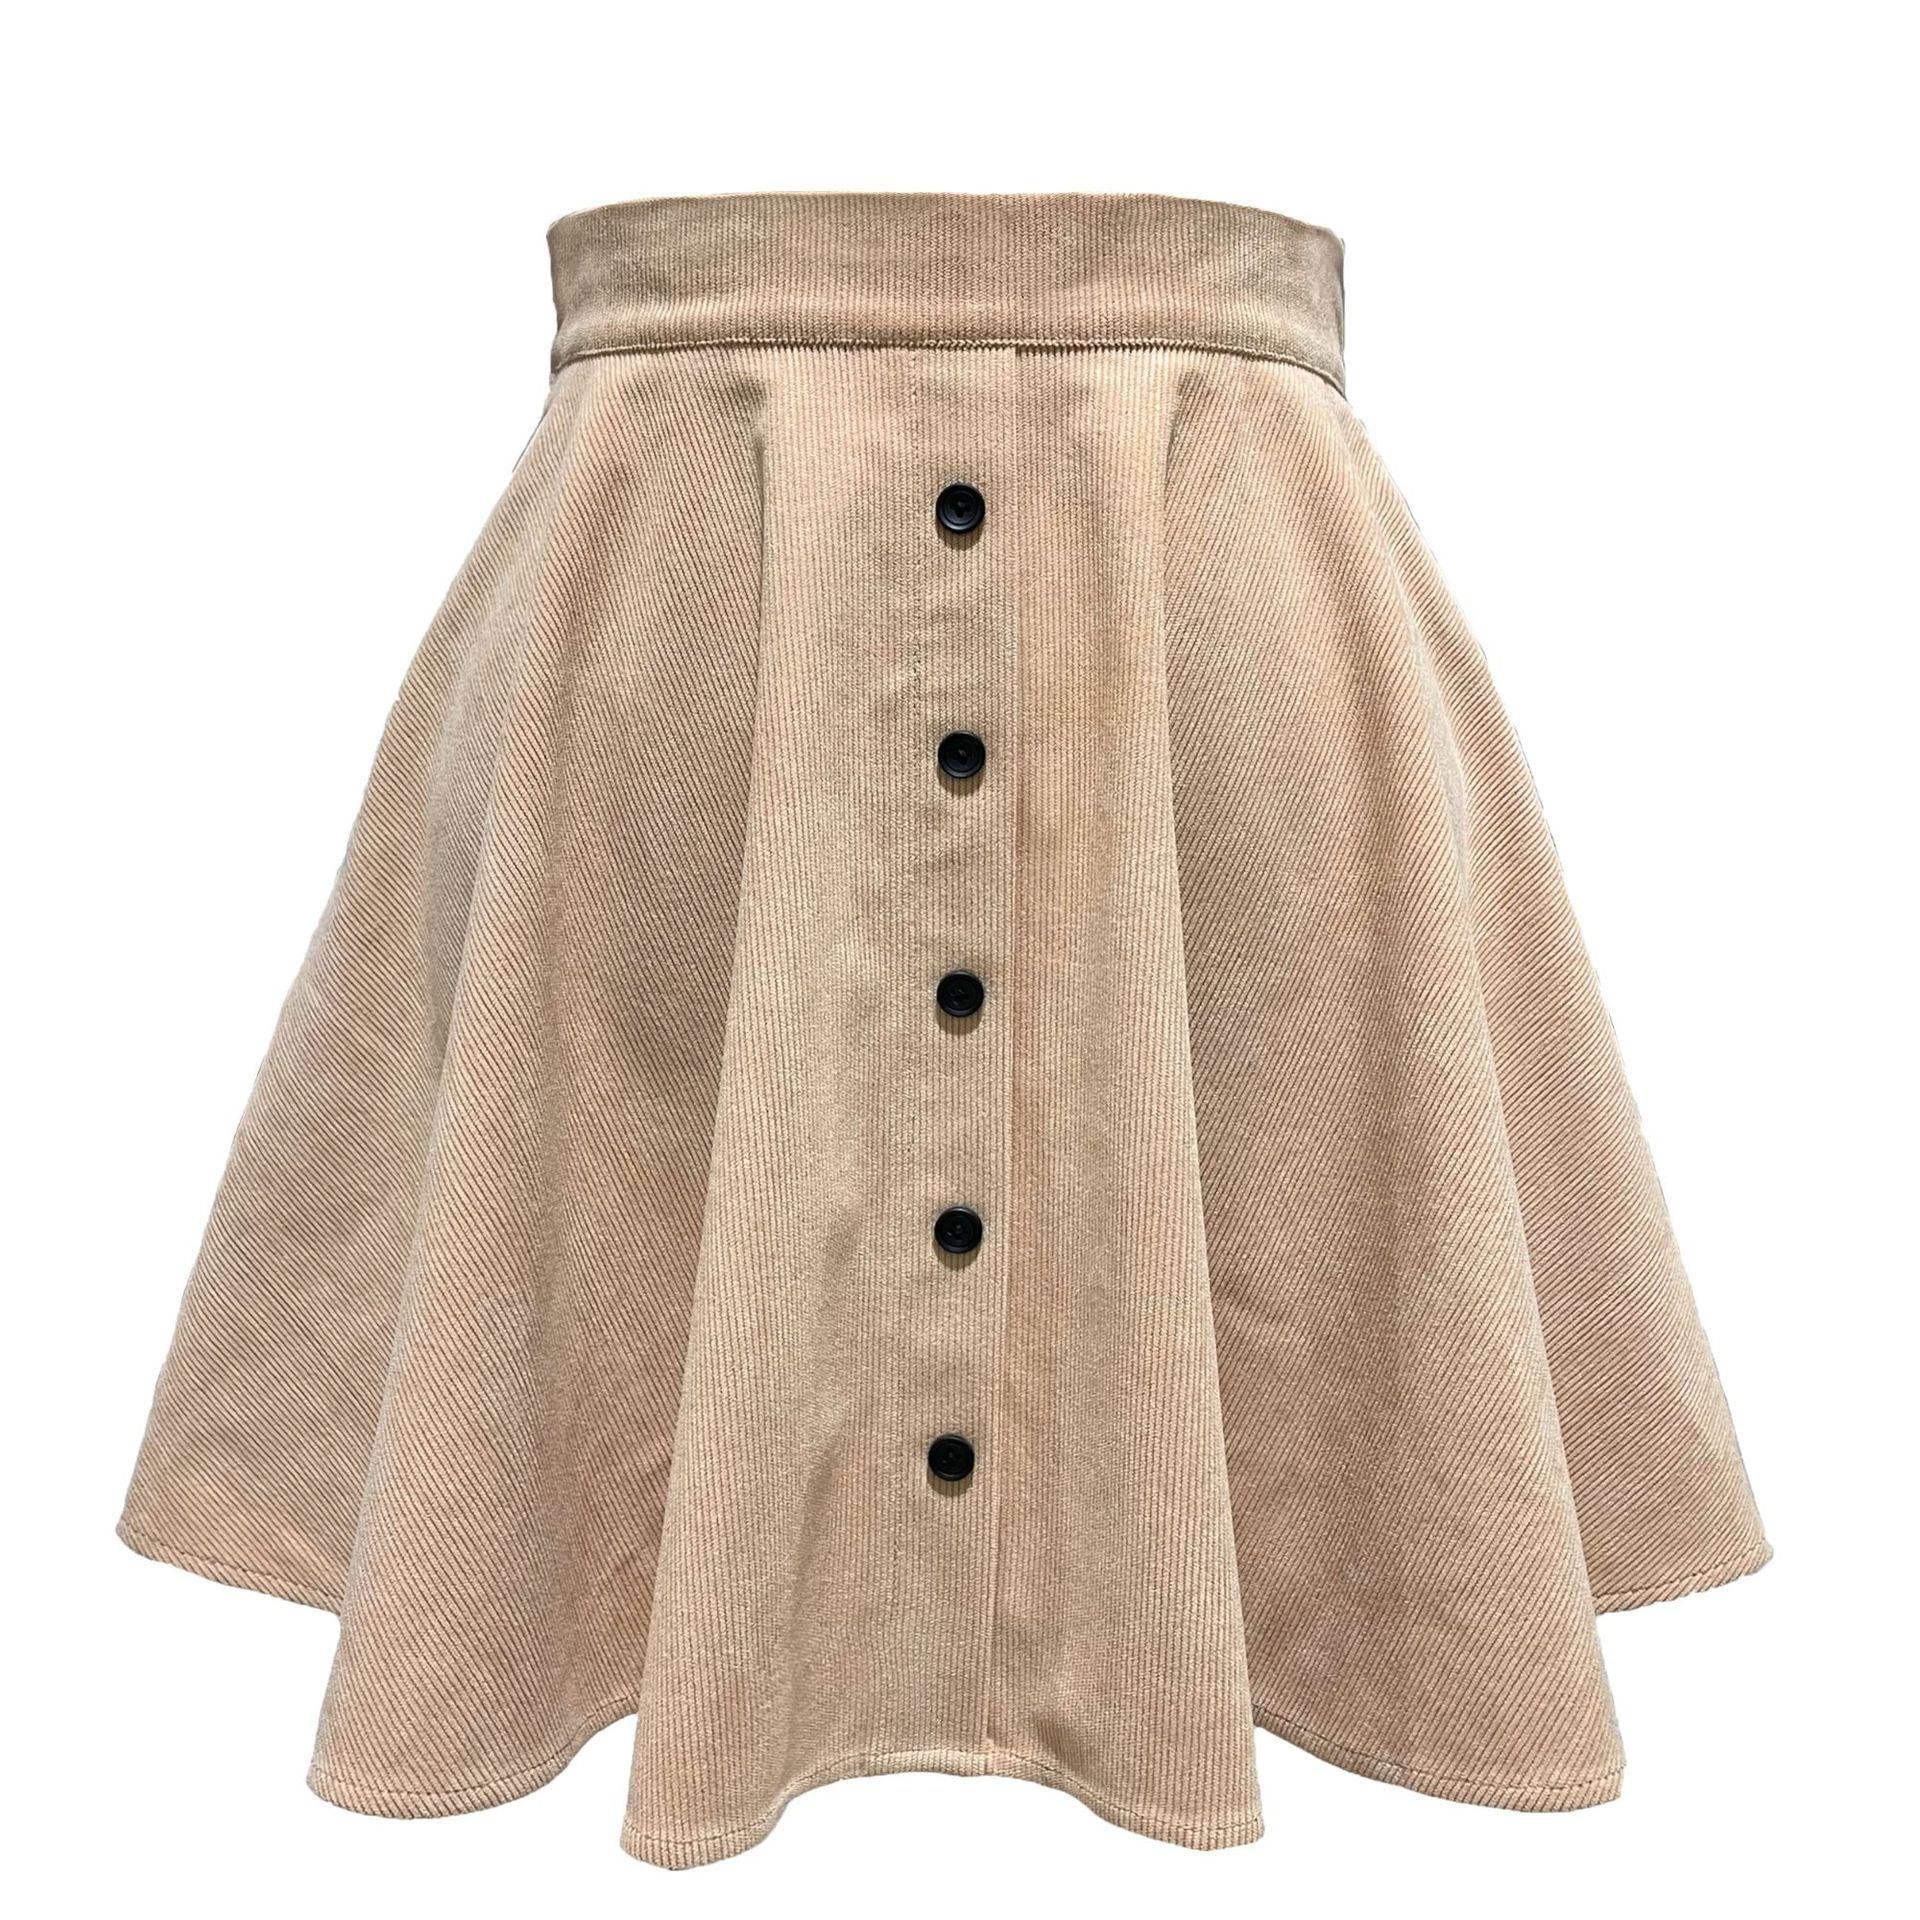 Women's Solid Color Corduroy Skirt – Autumn and Winter Essential with Button Detail - Glinyt